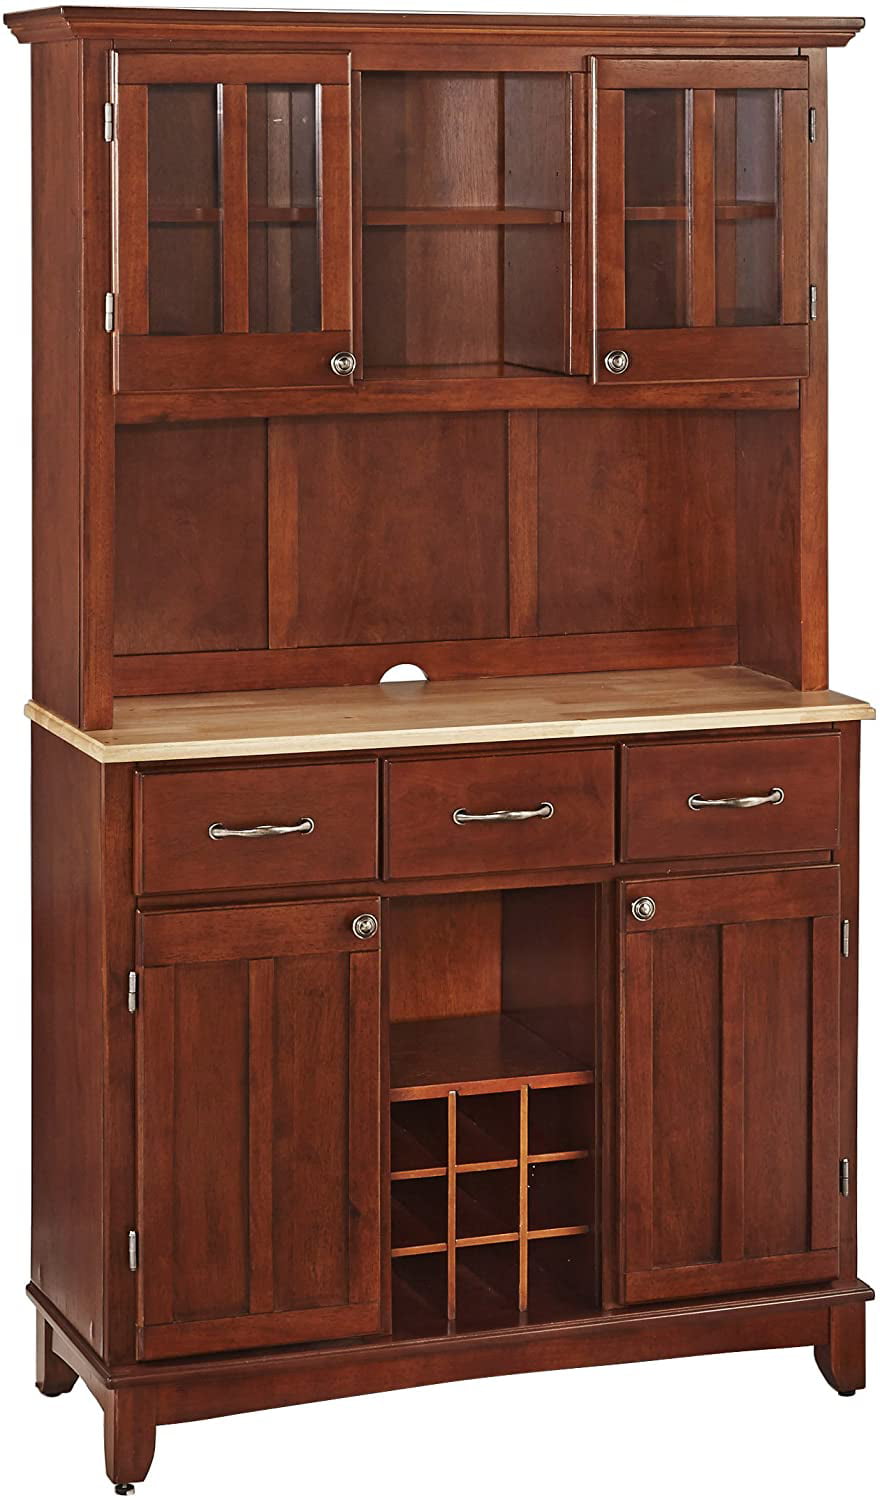 Large Buffet Of Buffets And Hutch With Cherry Finish With Natural Wood Top Three Utility Drawers Two Framed Cabinet Doors Optional Wine Storage Plexiglas Doors Plenty Of Adjustable Storage Walmart Com